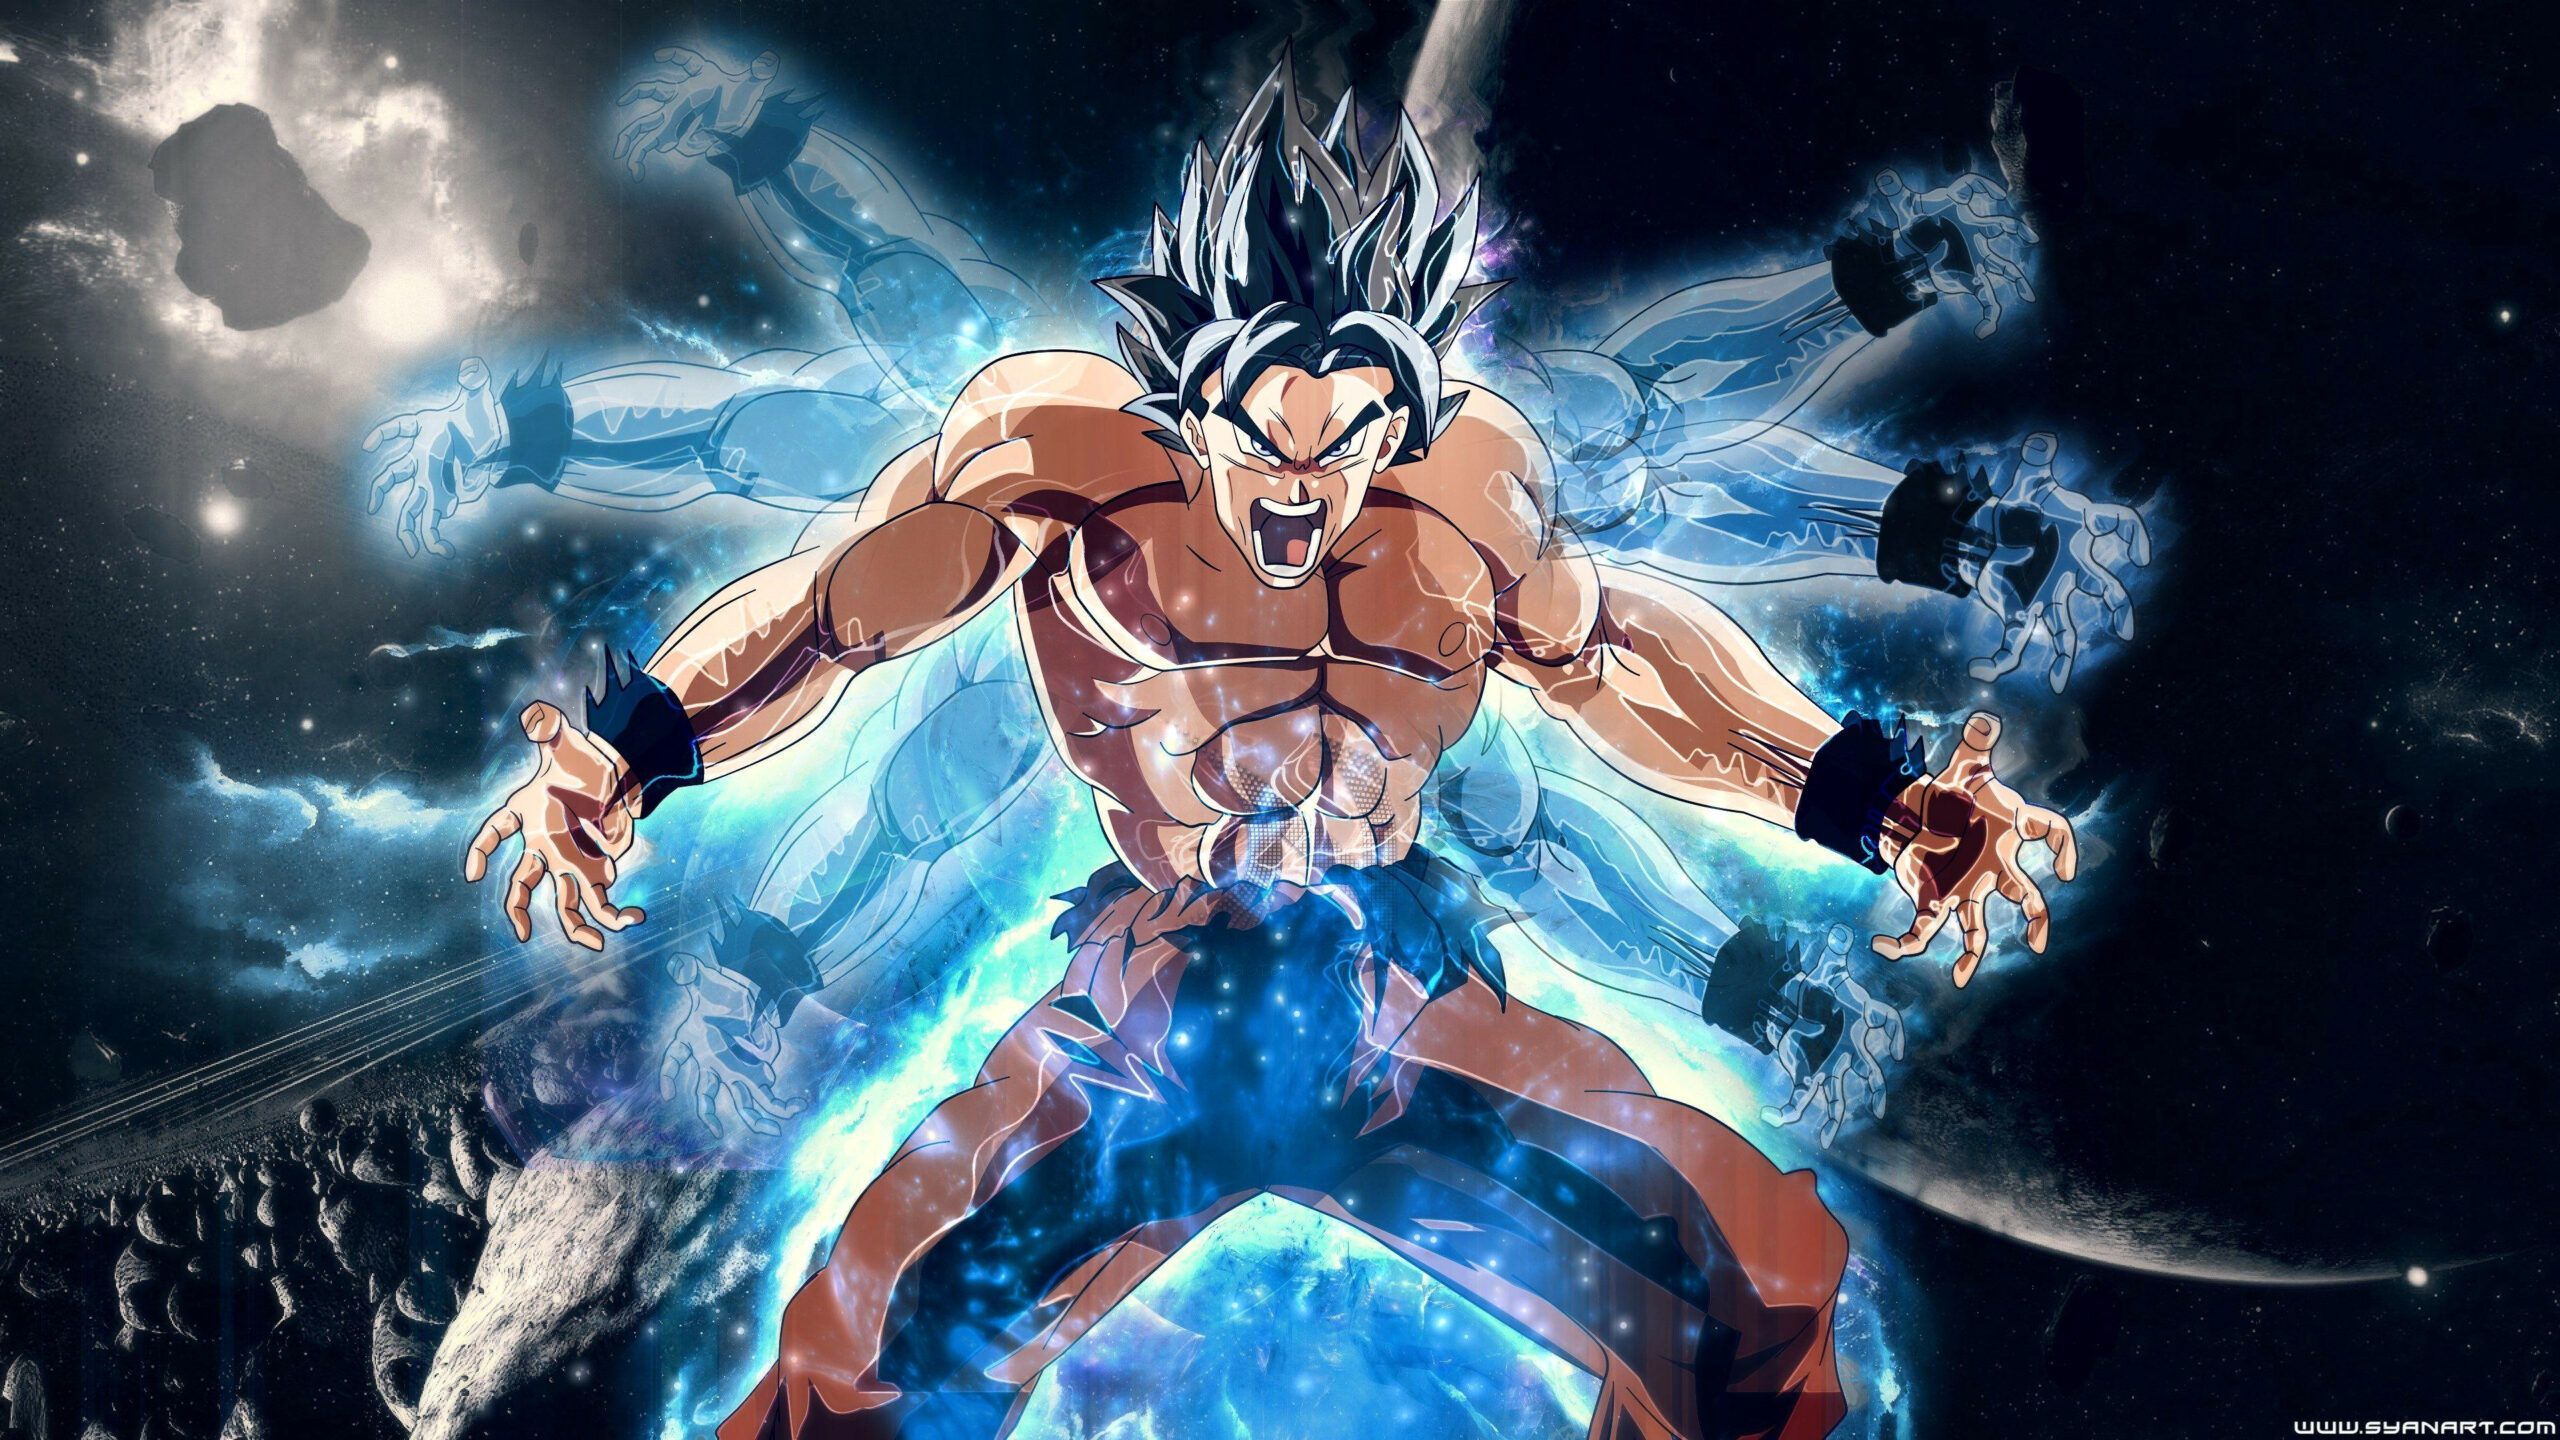 Fresh Dragon Ball Super Live Wallpaper For Android Wall #wallpaper